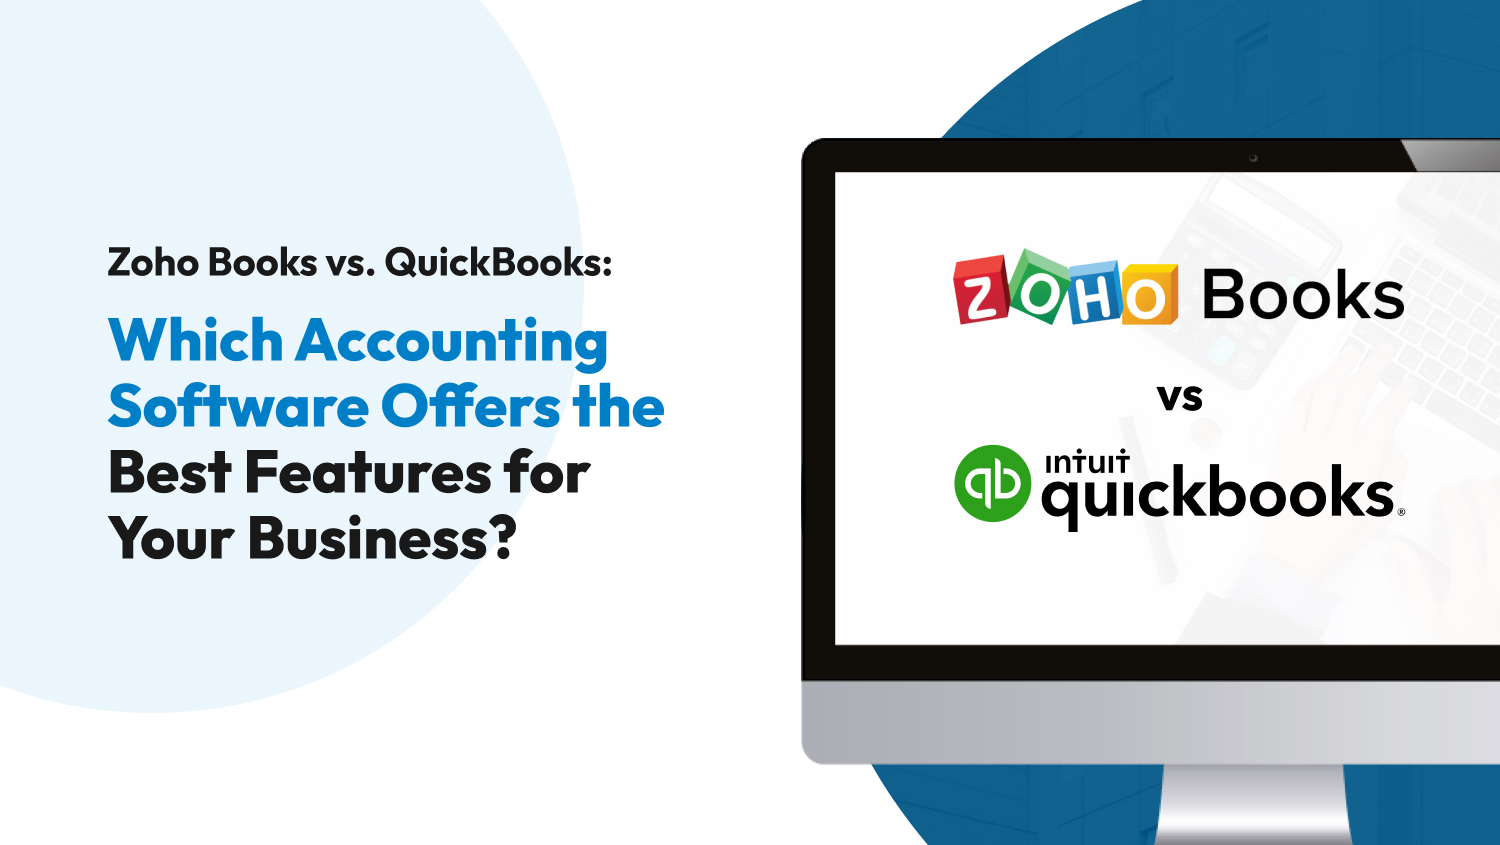 Zoho Books vs. QuickBooks: Which Accounting Software Offers the Best Features for Your Business?